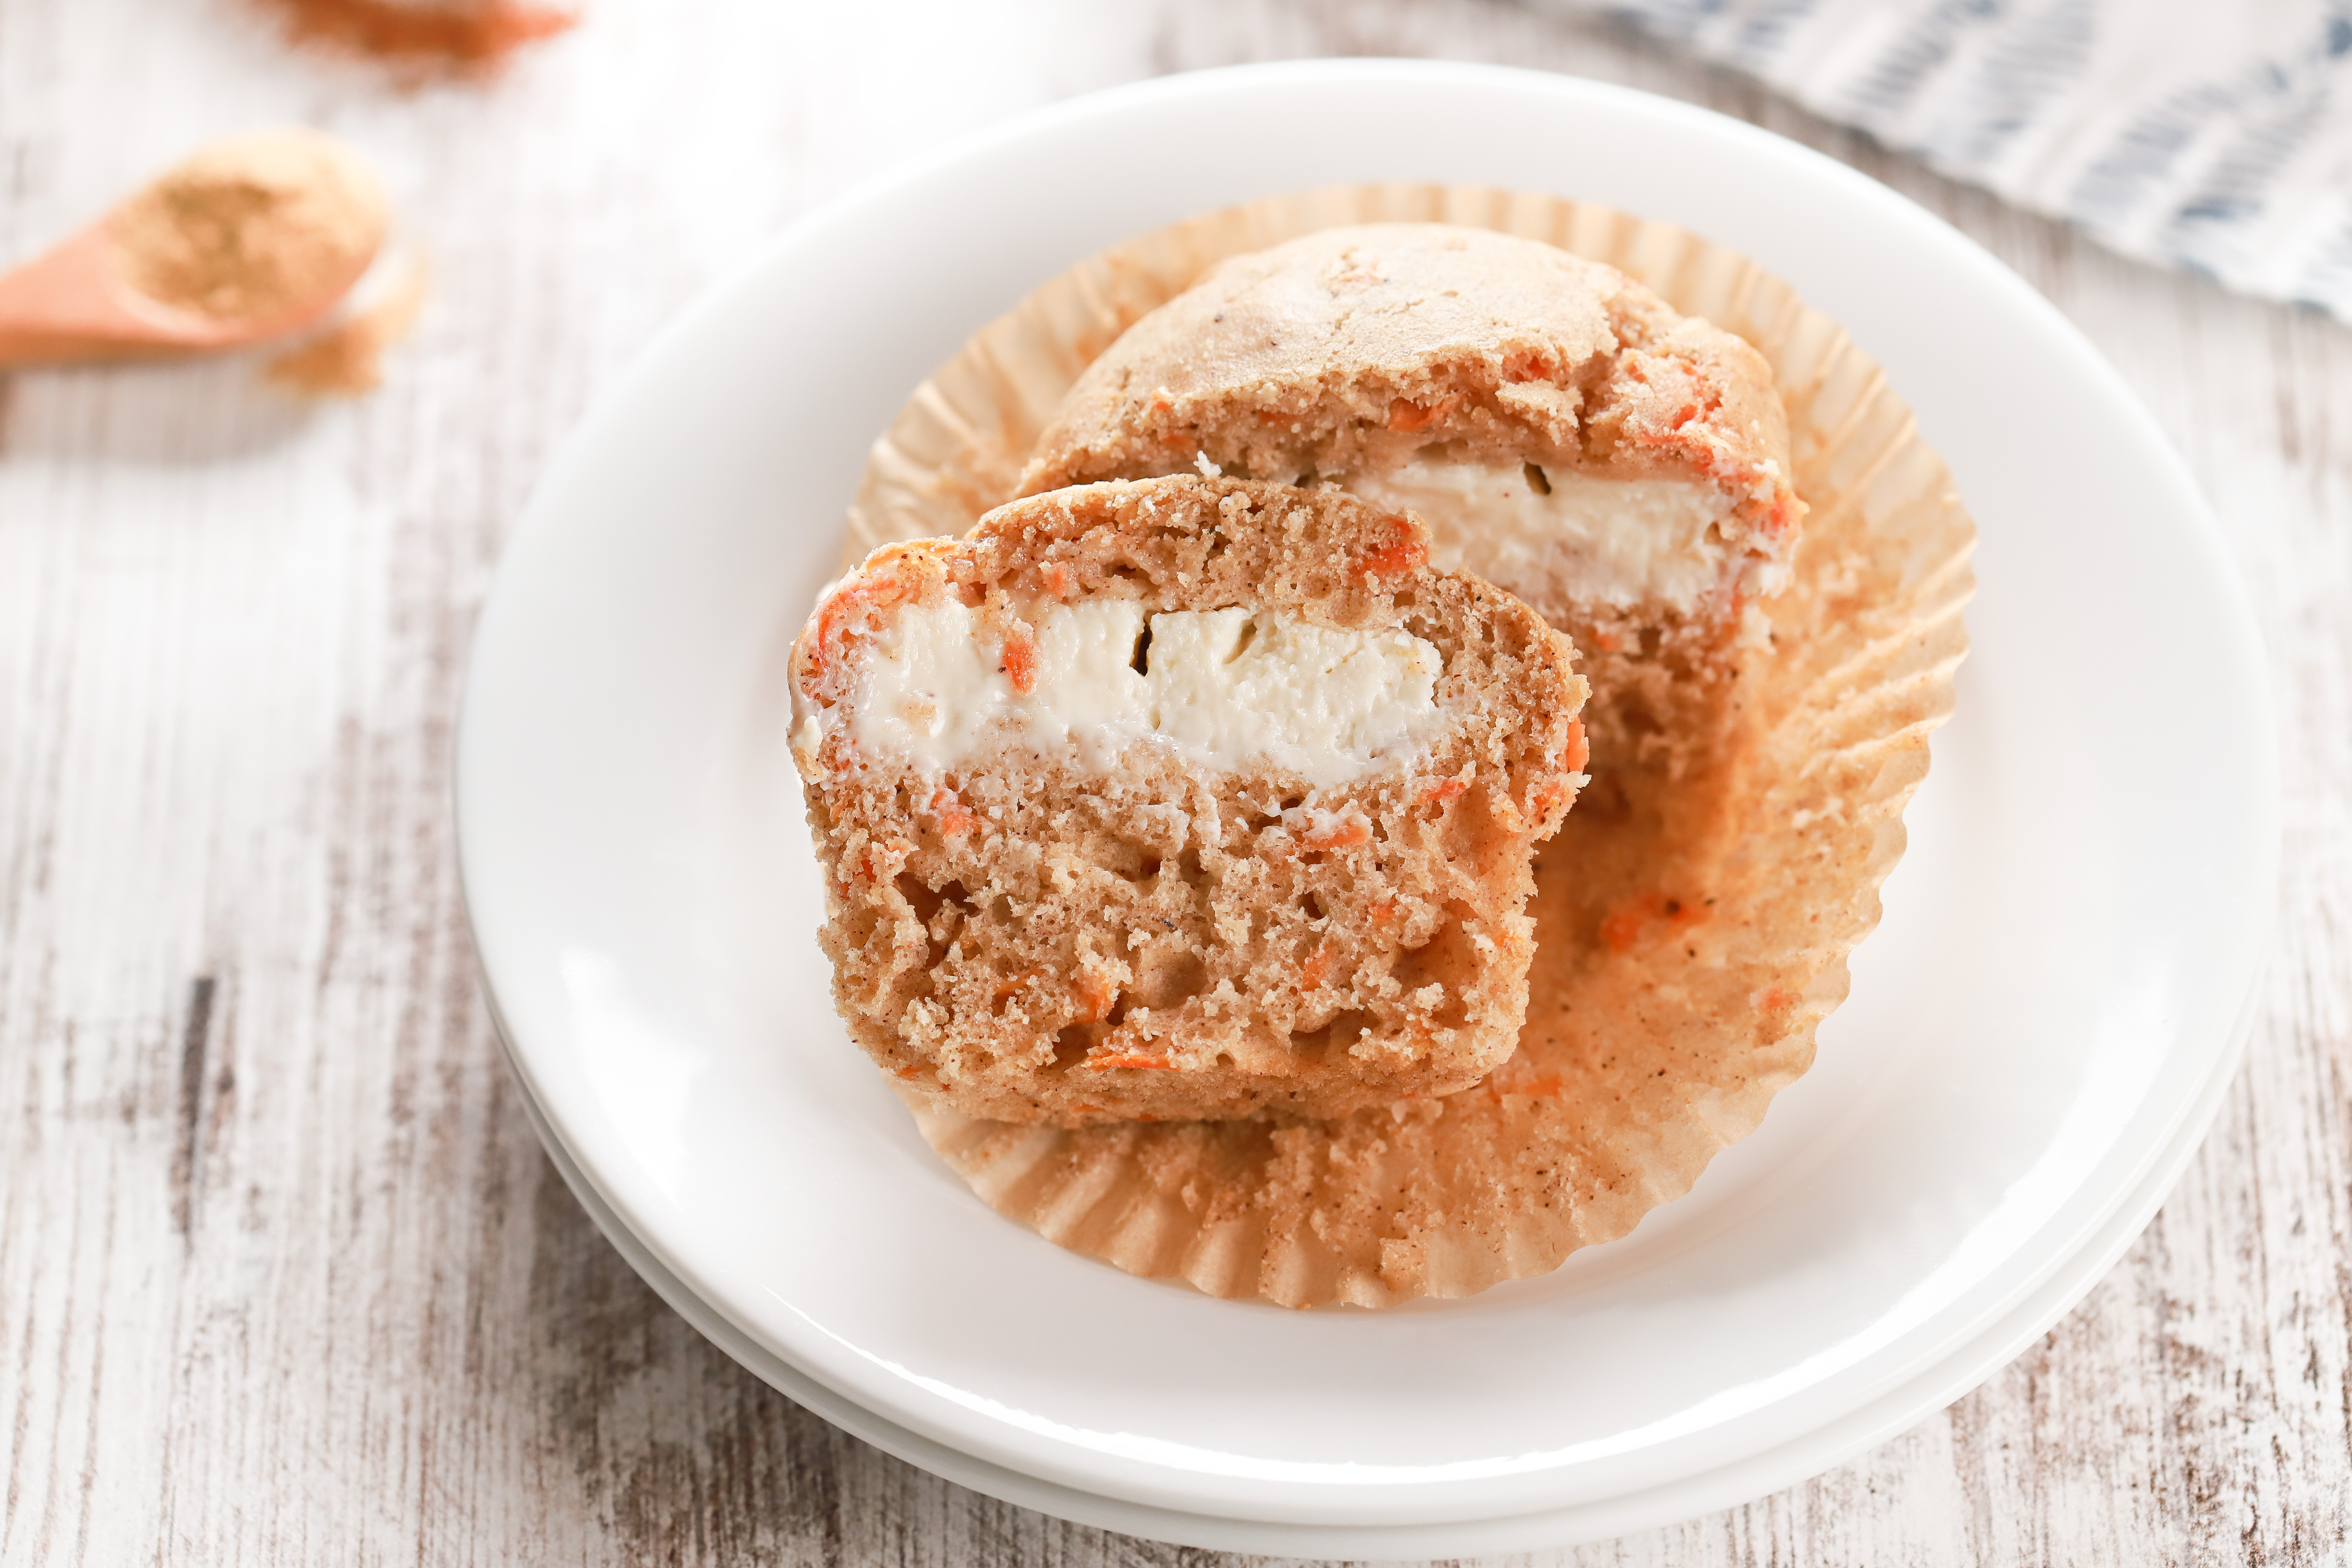 Side view of a carrot cake muffin on a small white plate sliced in half to show the cream cheese filling.